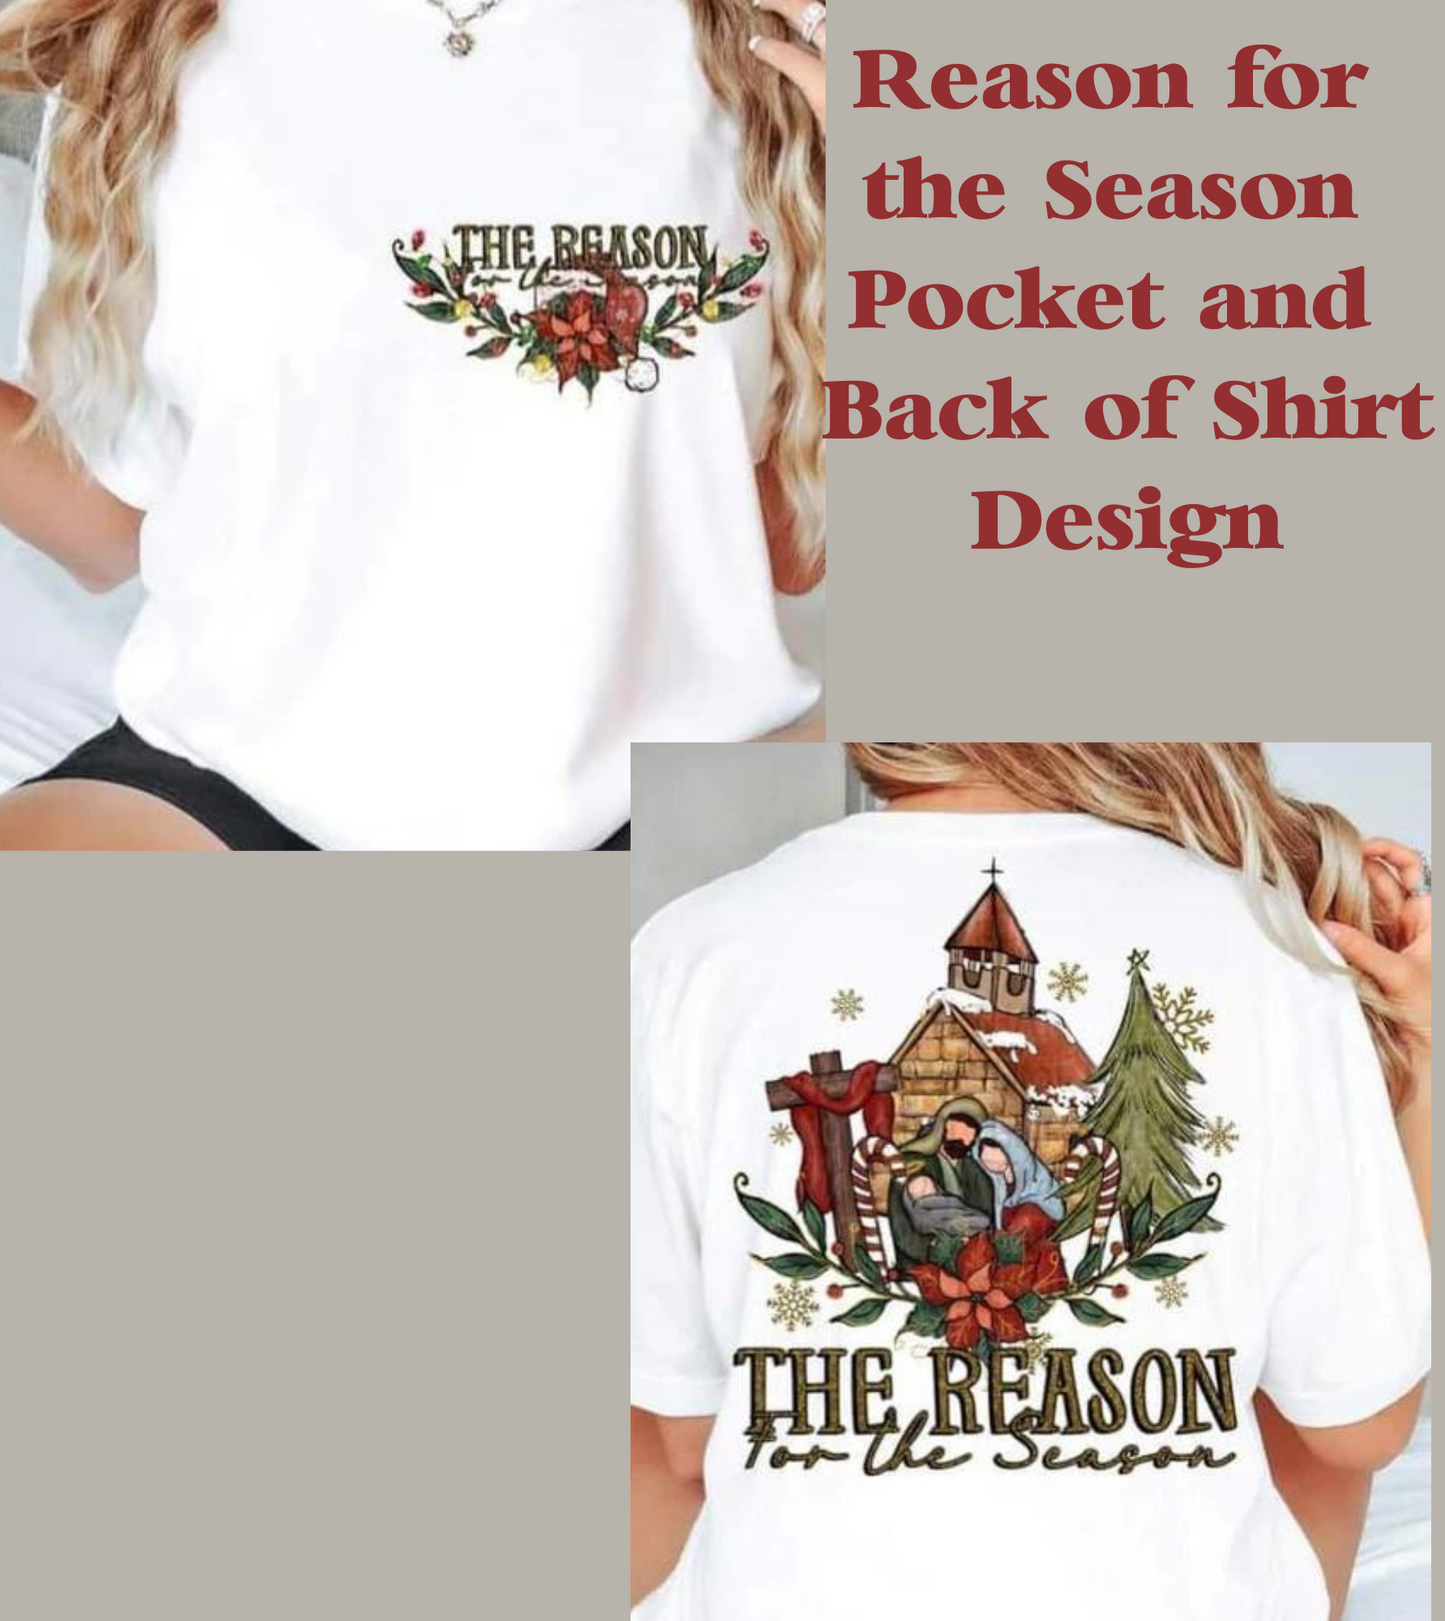 The Reason for the Season with Pocket Design